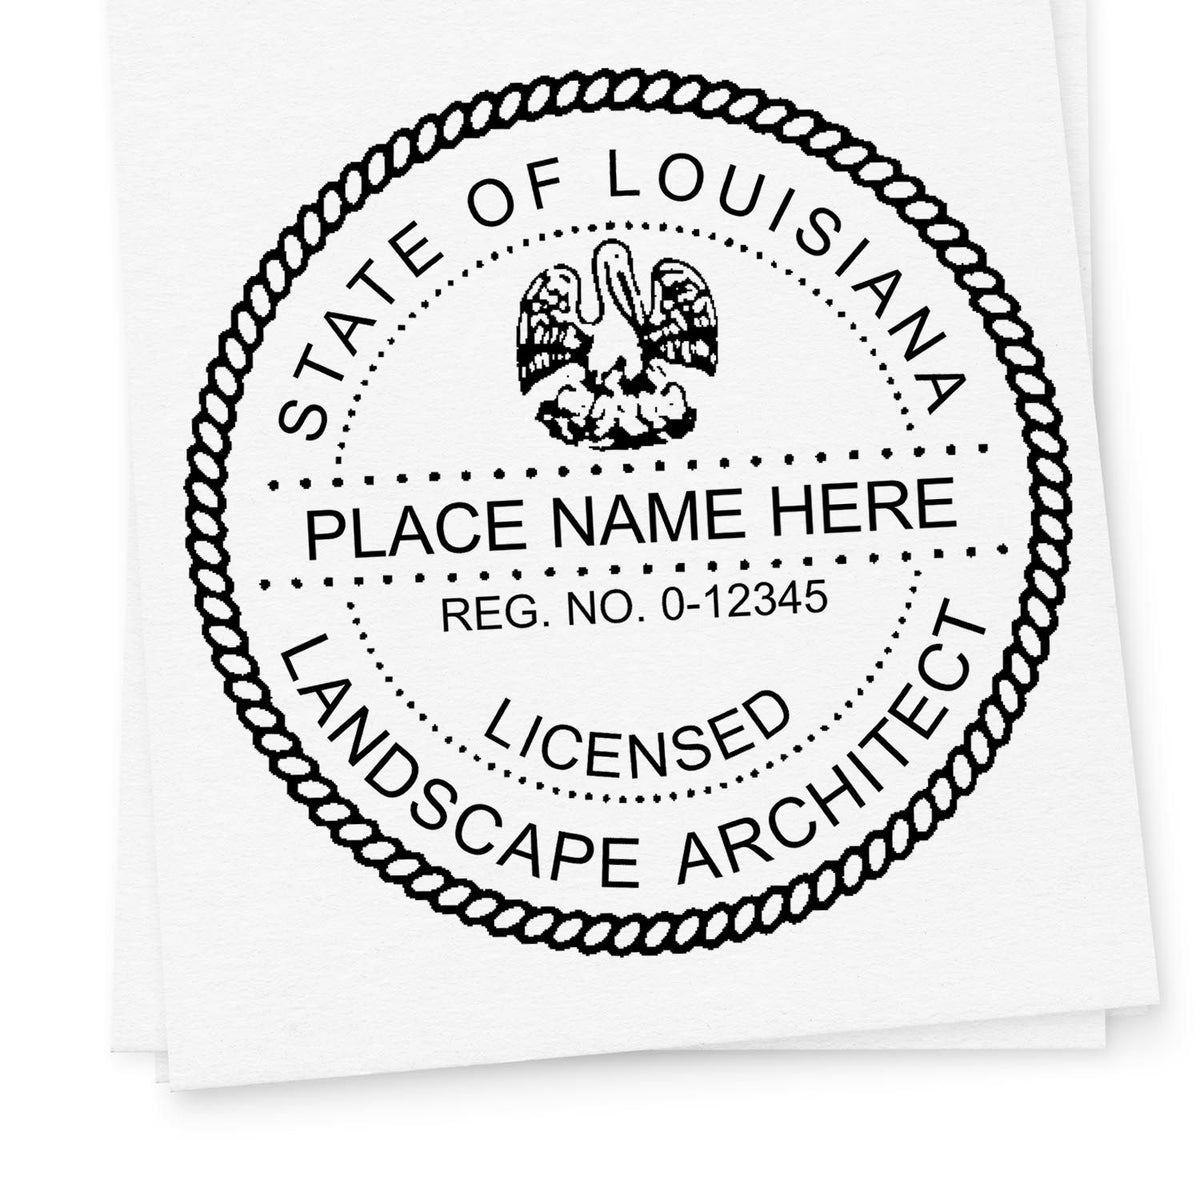 A stamped impression of the Digital Louisiana Landscape Architect Stamp in this stylish lifestyle photo, setting the tone for a unique and personalized product.